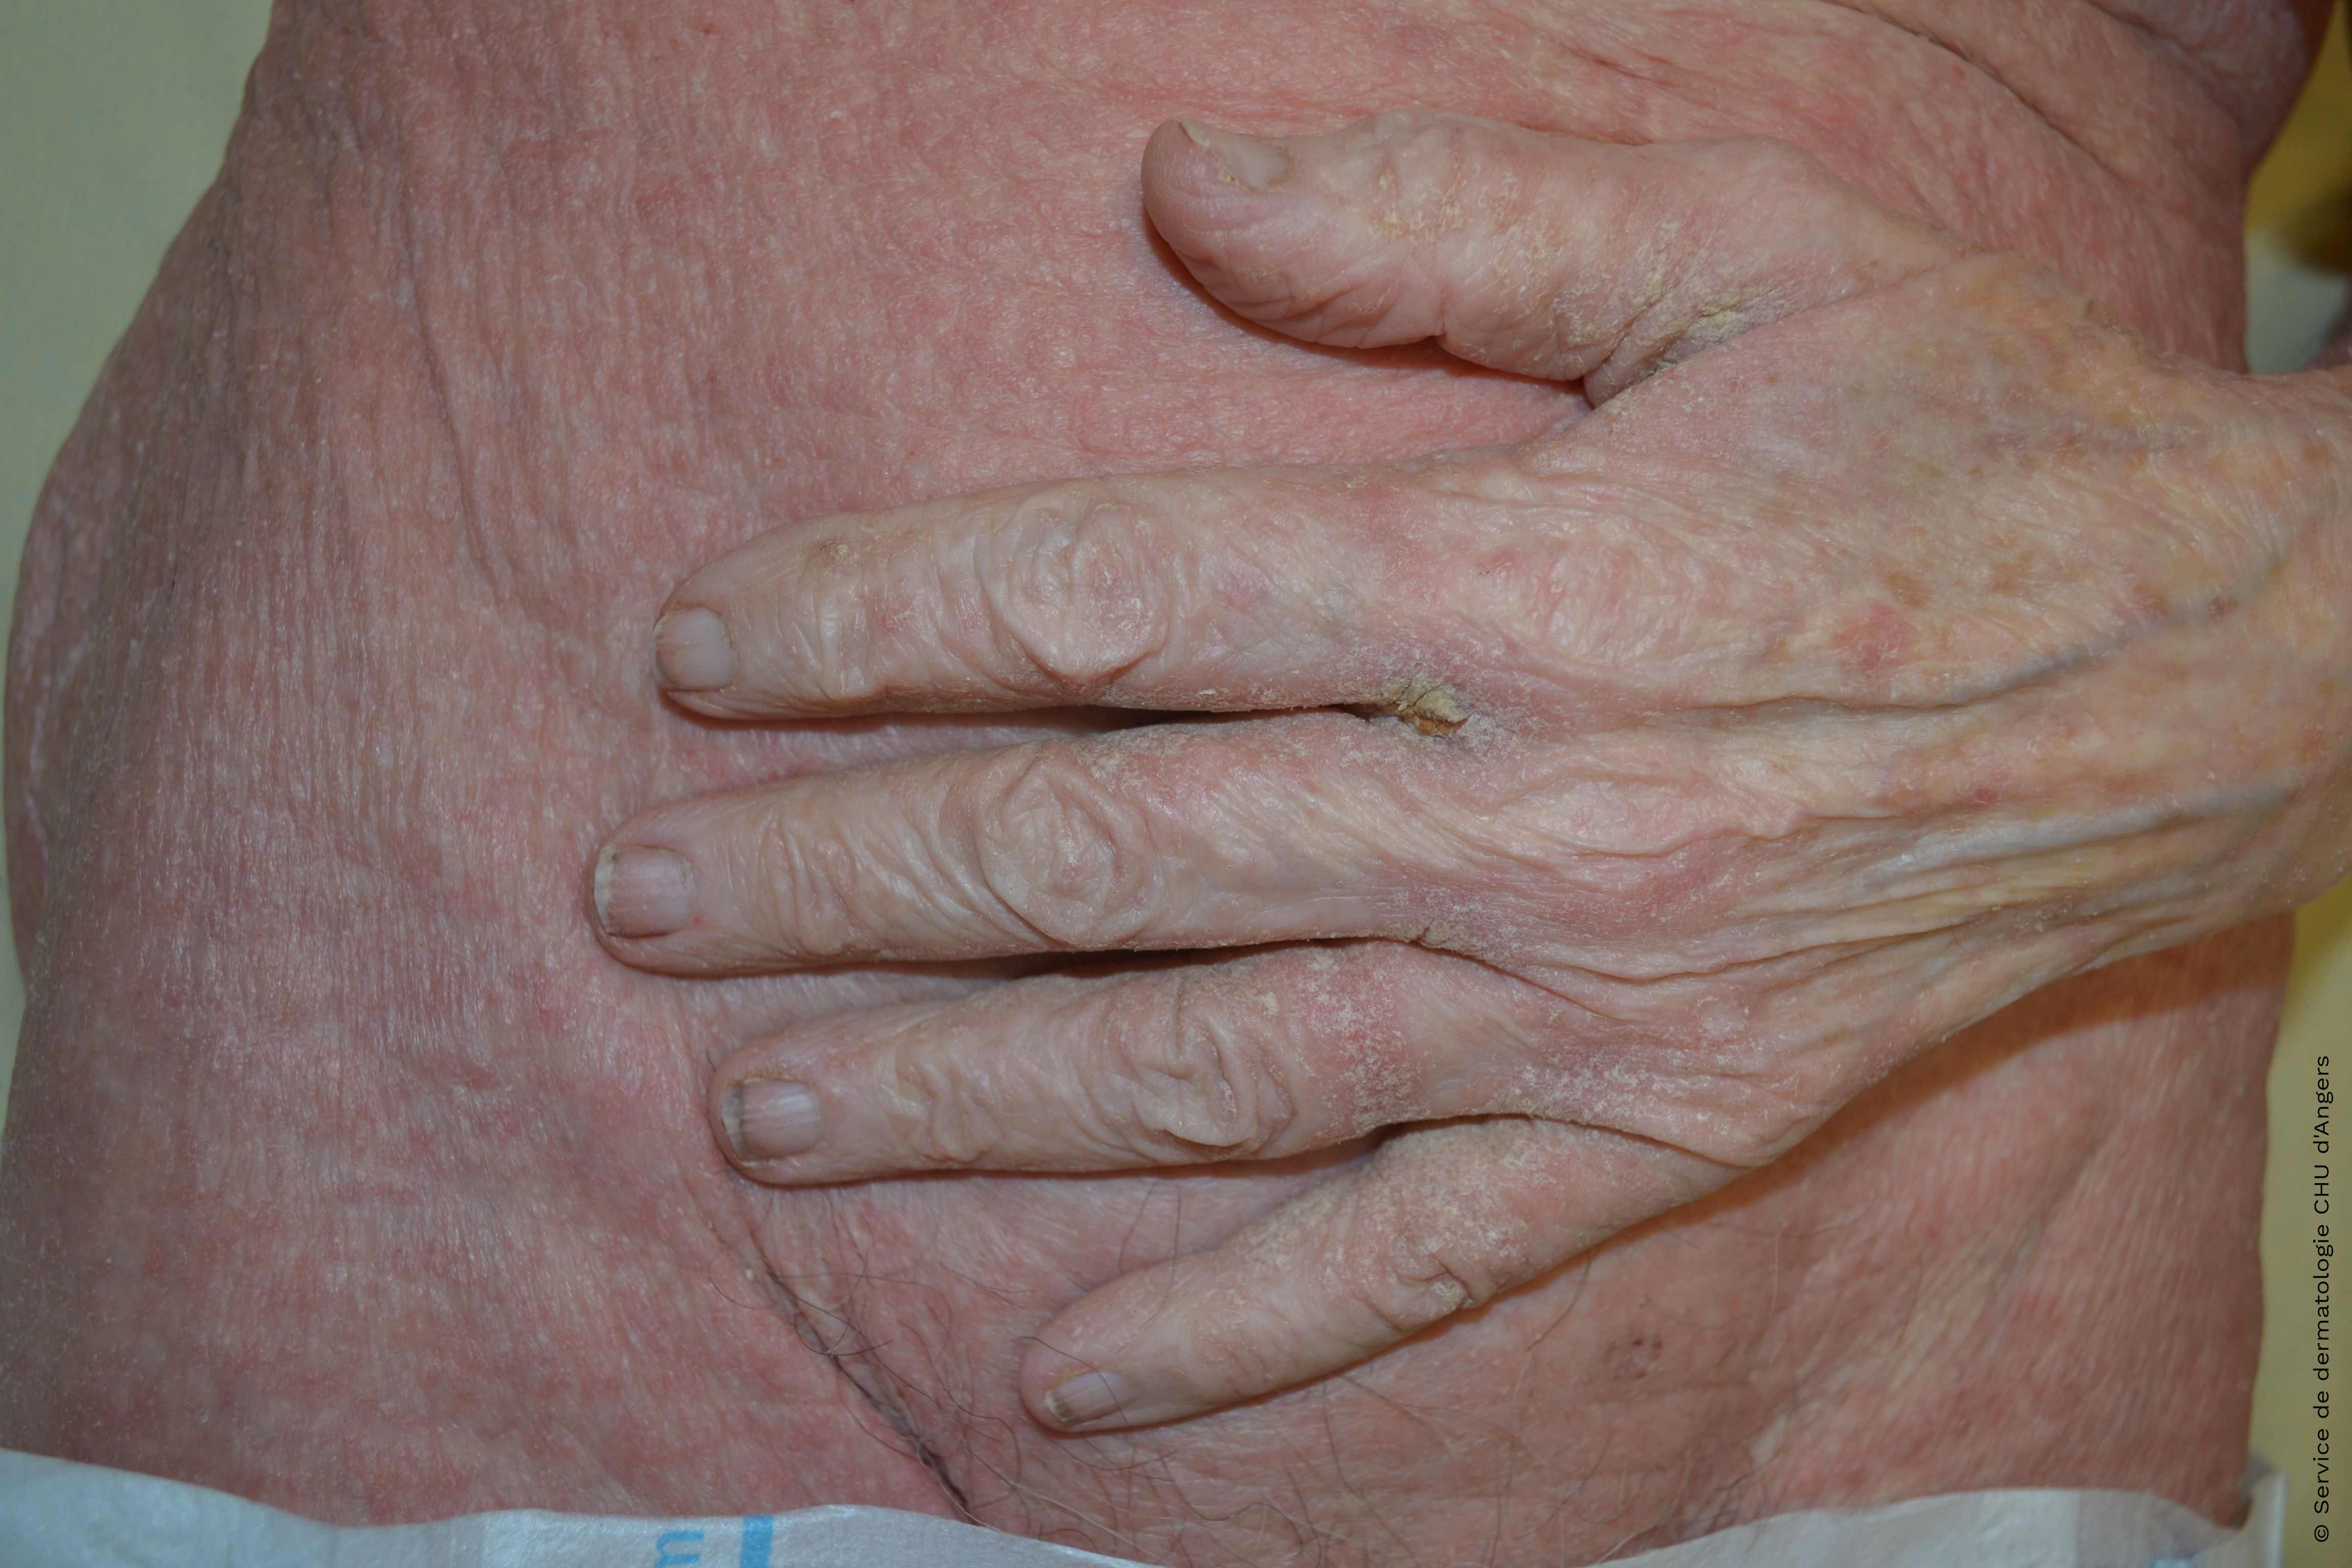 Profuse scabies of the elderly subject